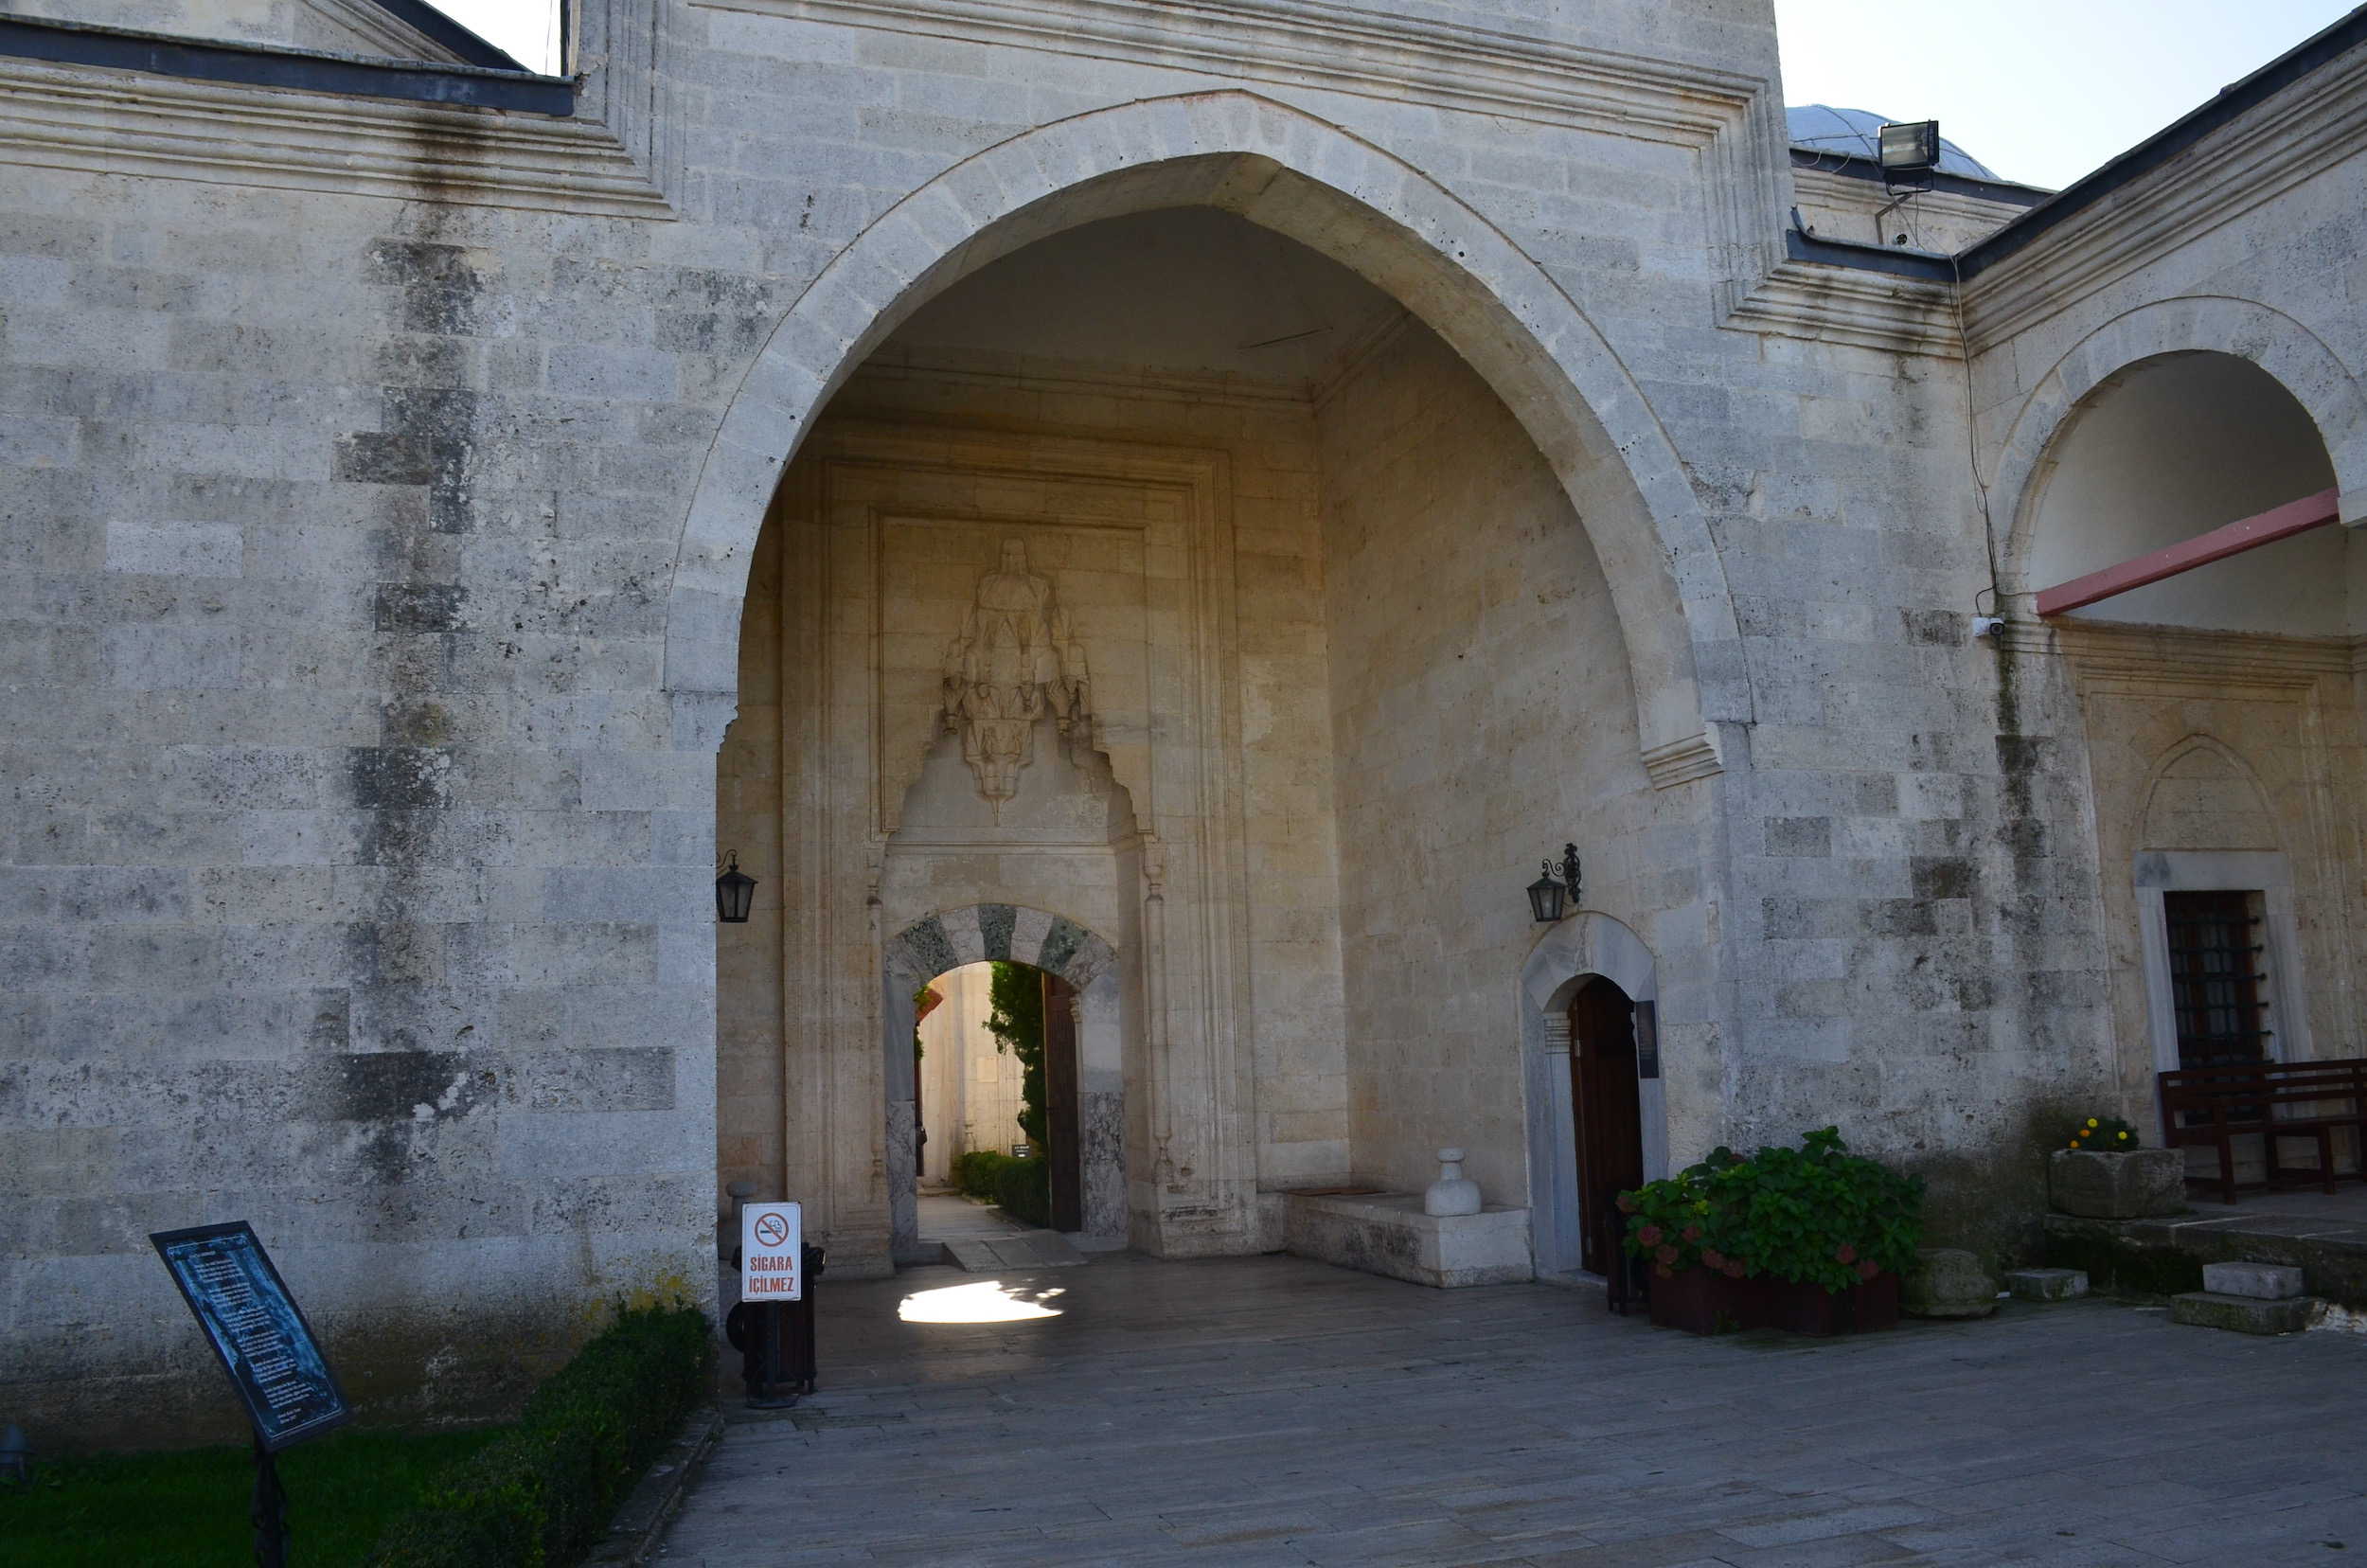 Entrance to the Second Courtyard at the Complex of Bayezid II Health Museum in Edirne, Turkey